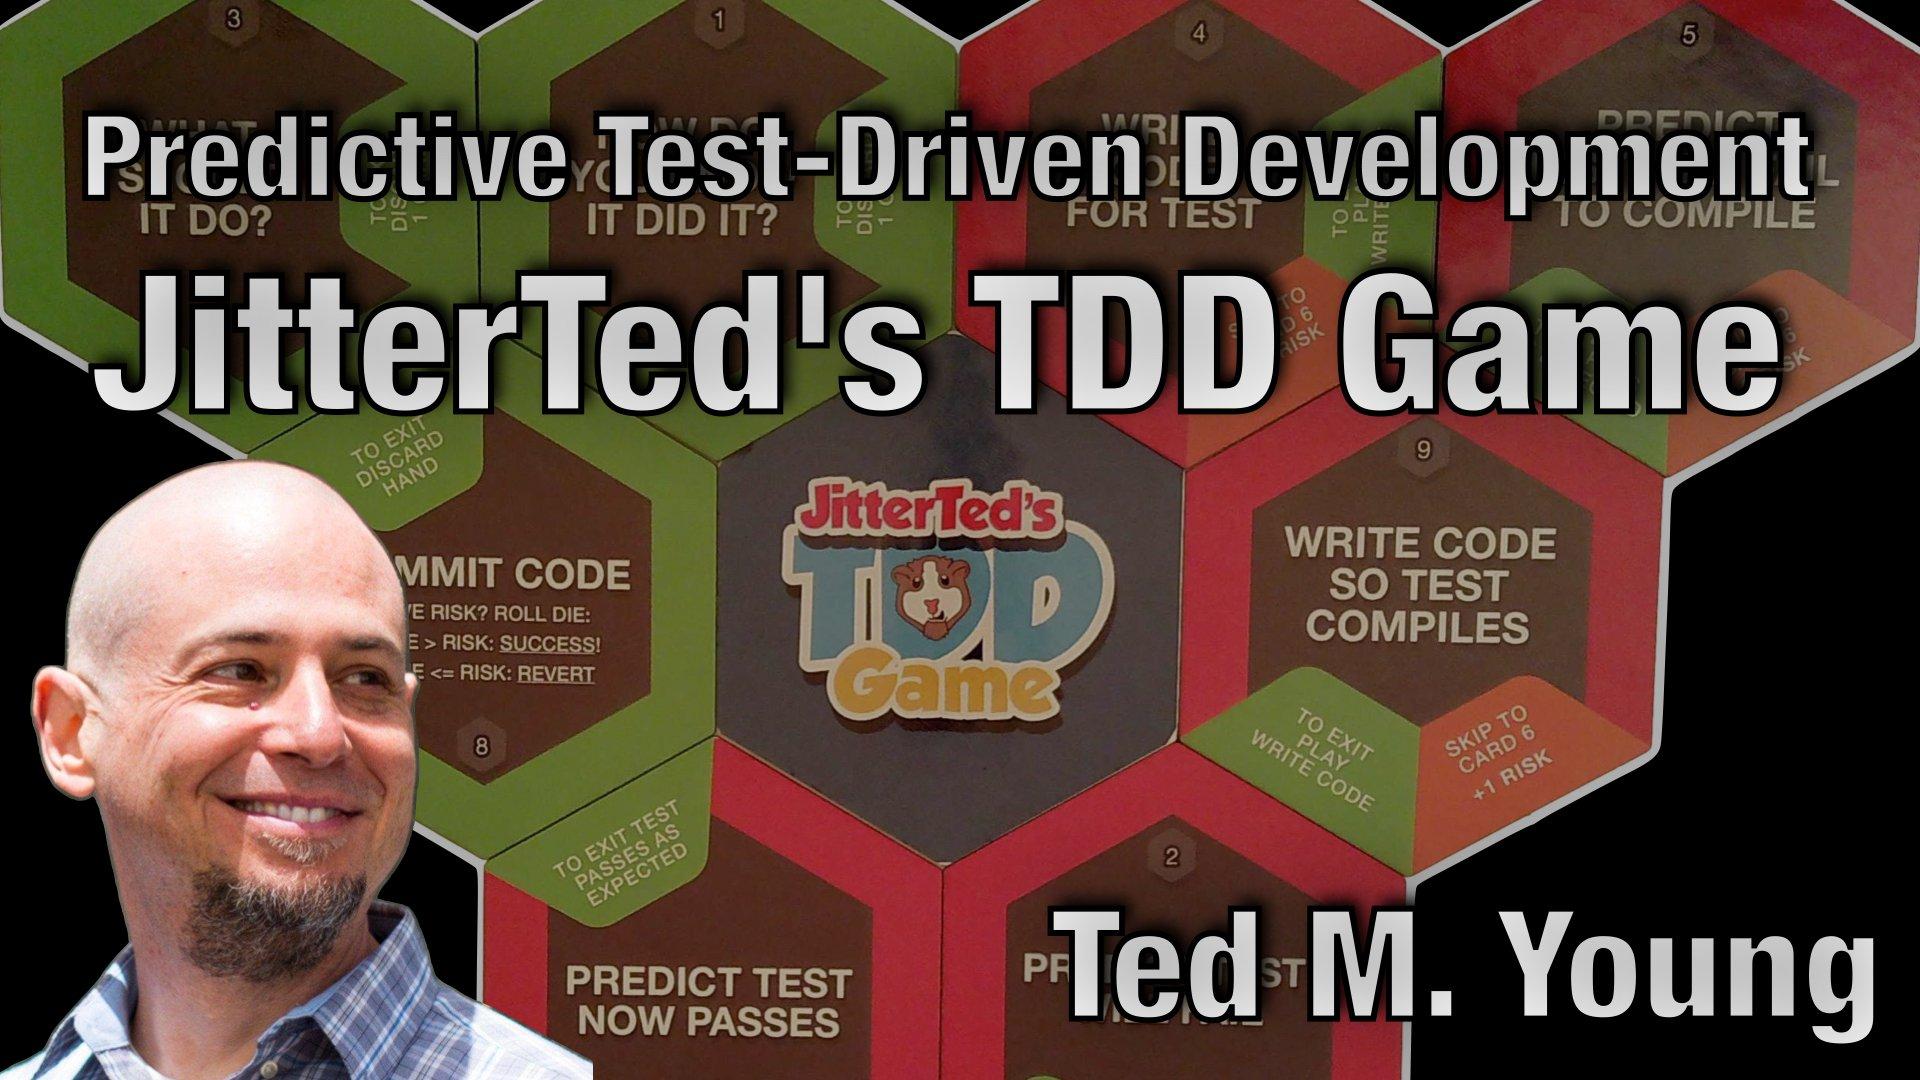  Learning Predictive Test-Driven Development with JitterTed's TDD Game